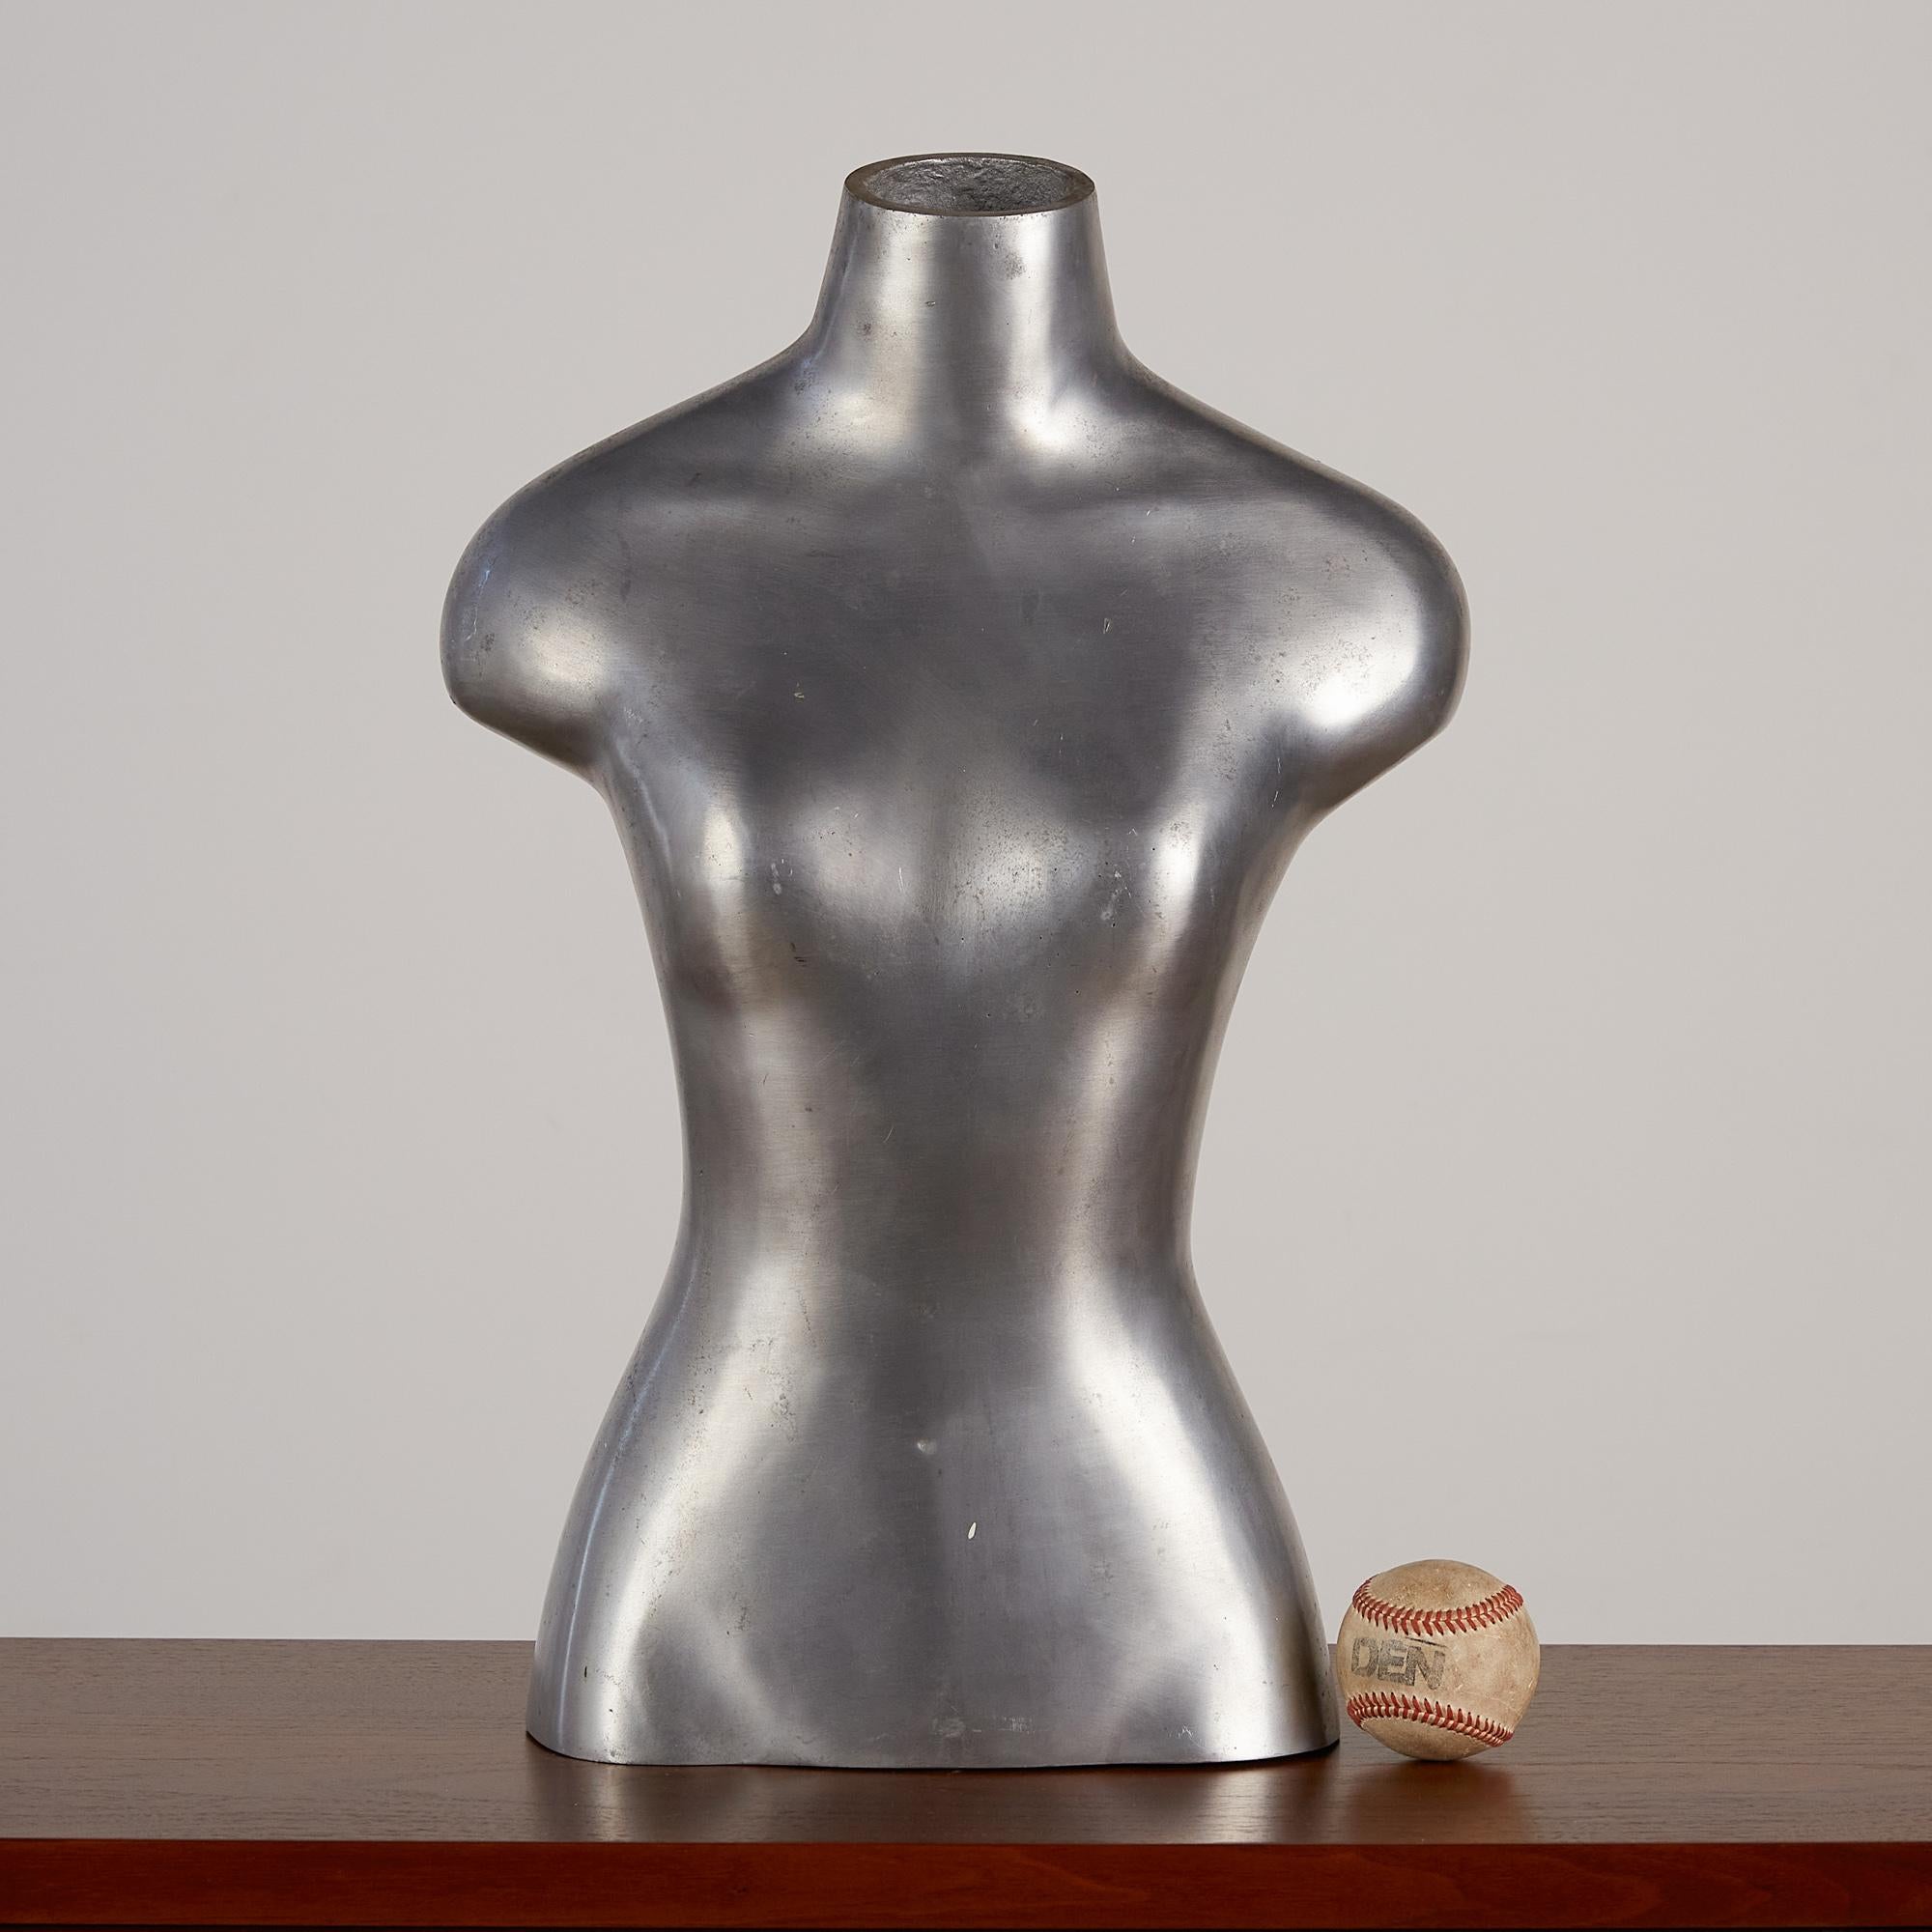 Made out of a material far more interesting than your standard dress form, this oddly unique, mannequin torso is both playful and sleek. A true statement piece that would be well suited as is on a credenza or shelf, it can also be mounted on a post